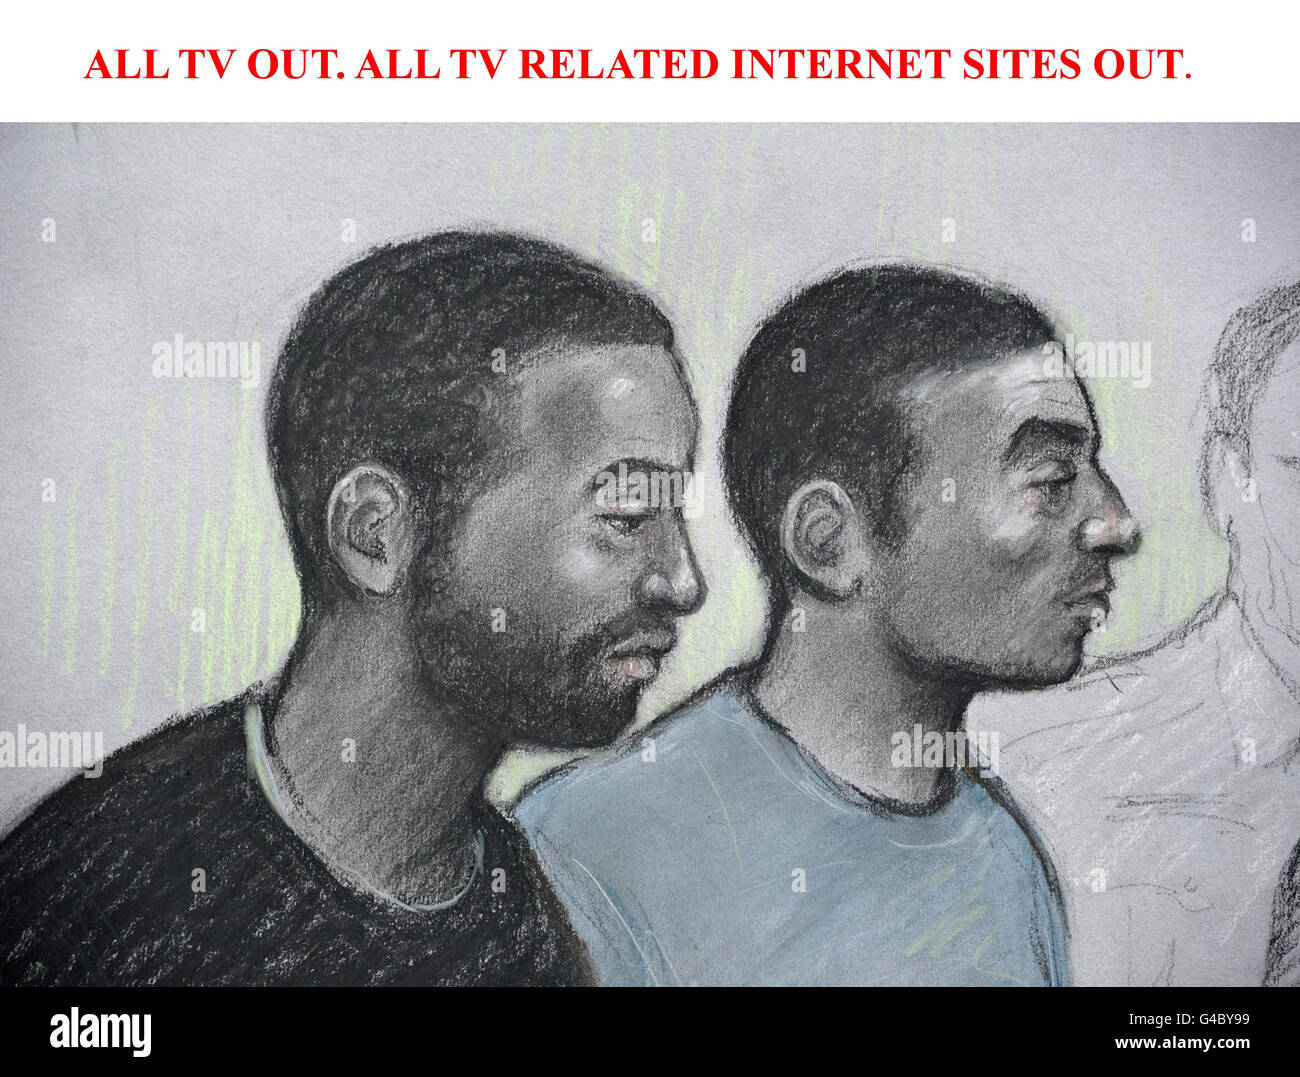 ALL TV OUT. ALL TV RELATED INTERNET SITES OUT. Artist impression by courts artist Elizabeth Cook of Kevin Liverpool, 33, (left) and Junior Bradshaw, 30, at Exeter Magistrates' Court where they were remanded in custody and charged with conspiracy to commit grievous bodily harm and conspiracy to commit robbery. Stock Photo